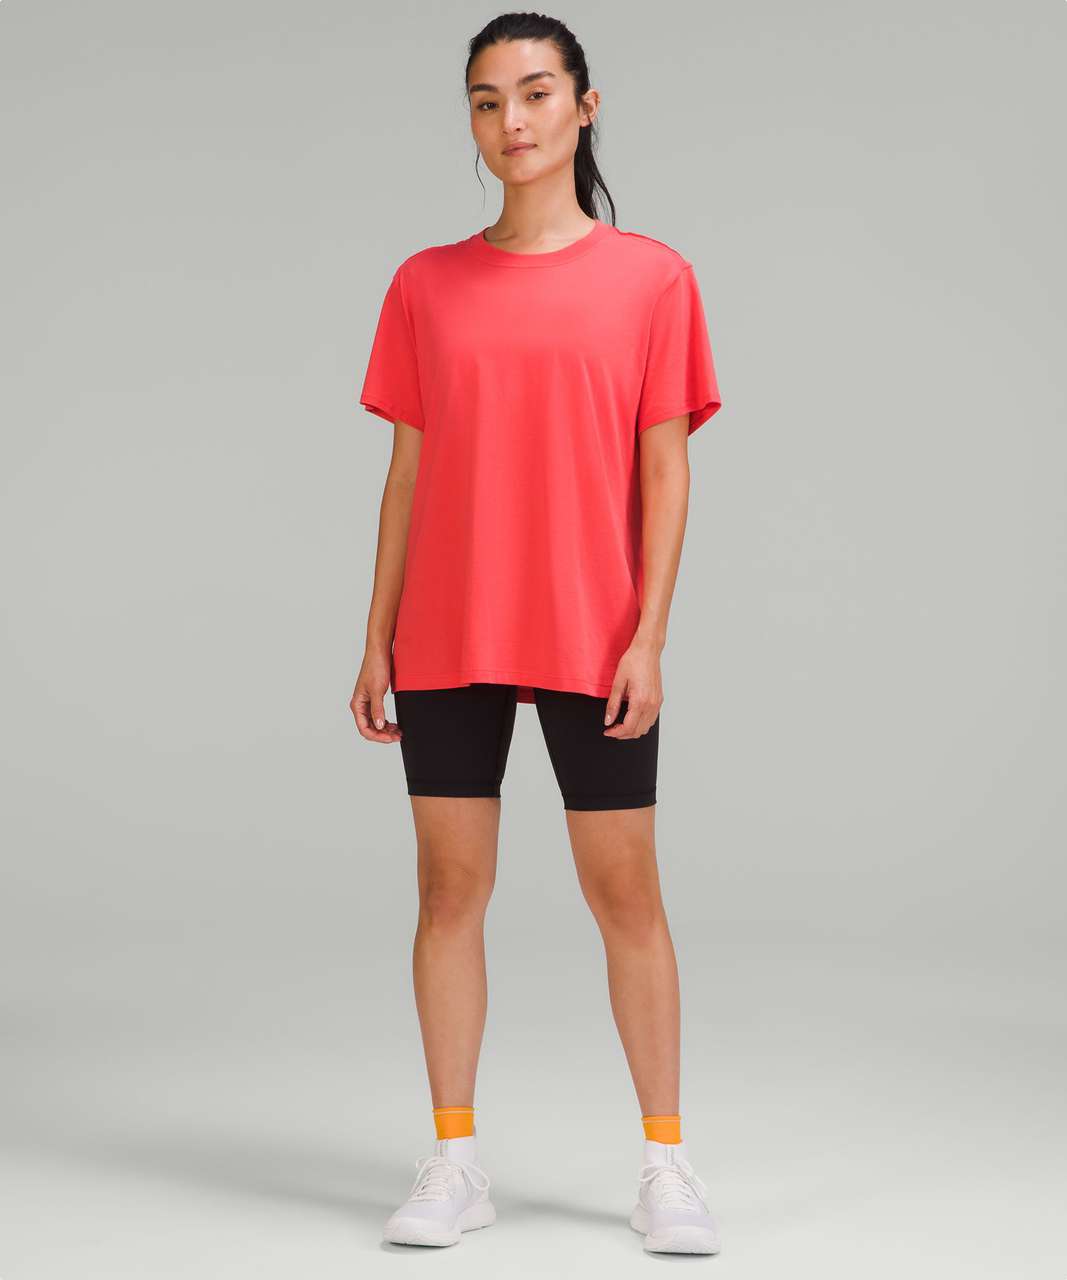 Lululemon All Yours Cotton T-Shirt - Pale Raspberry